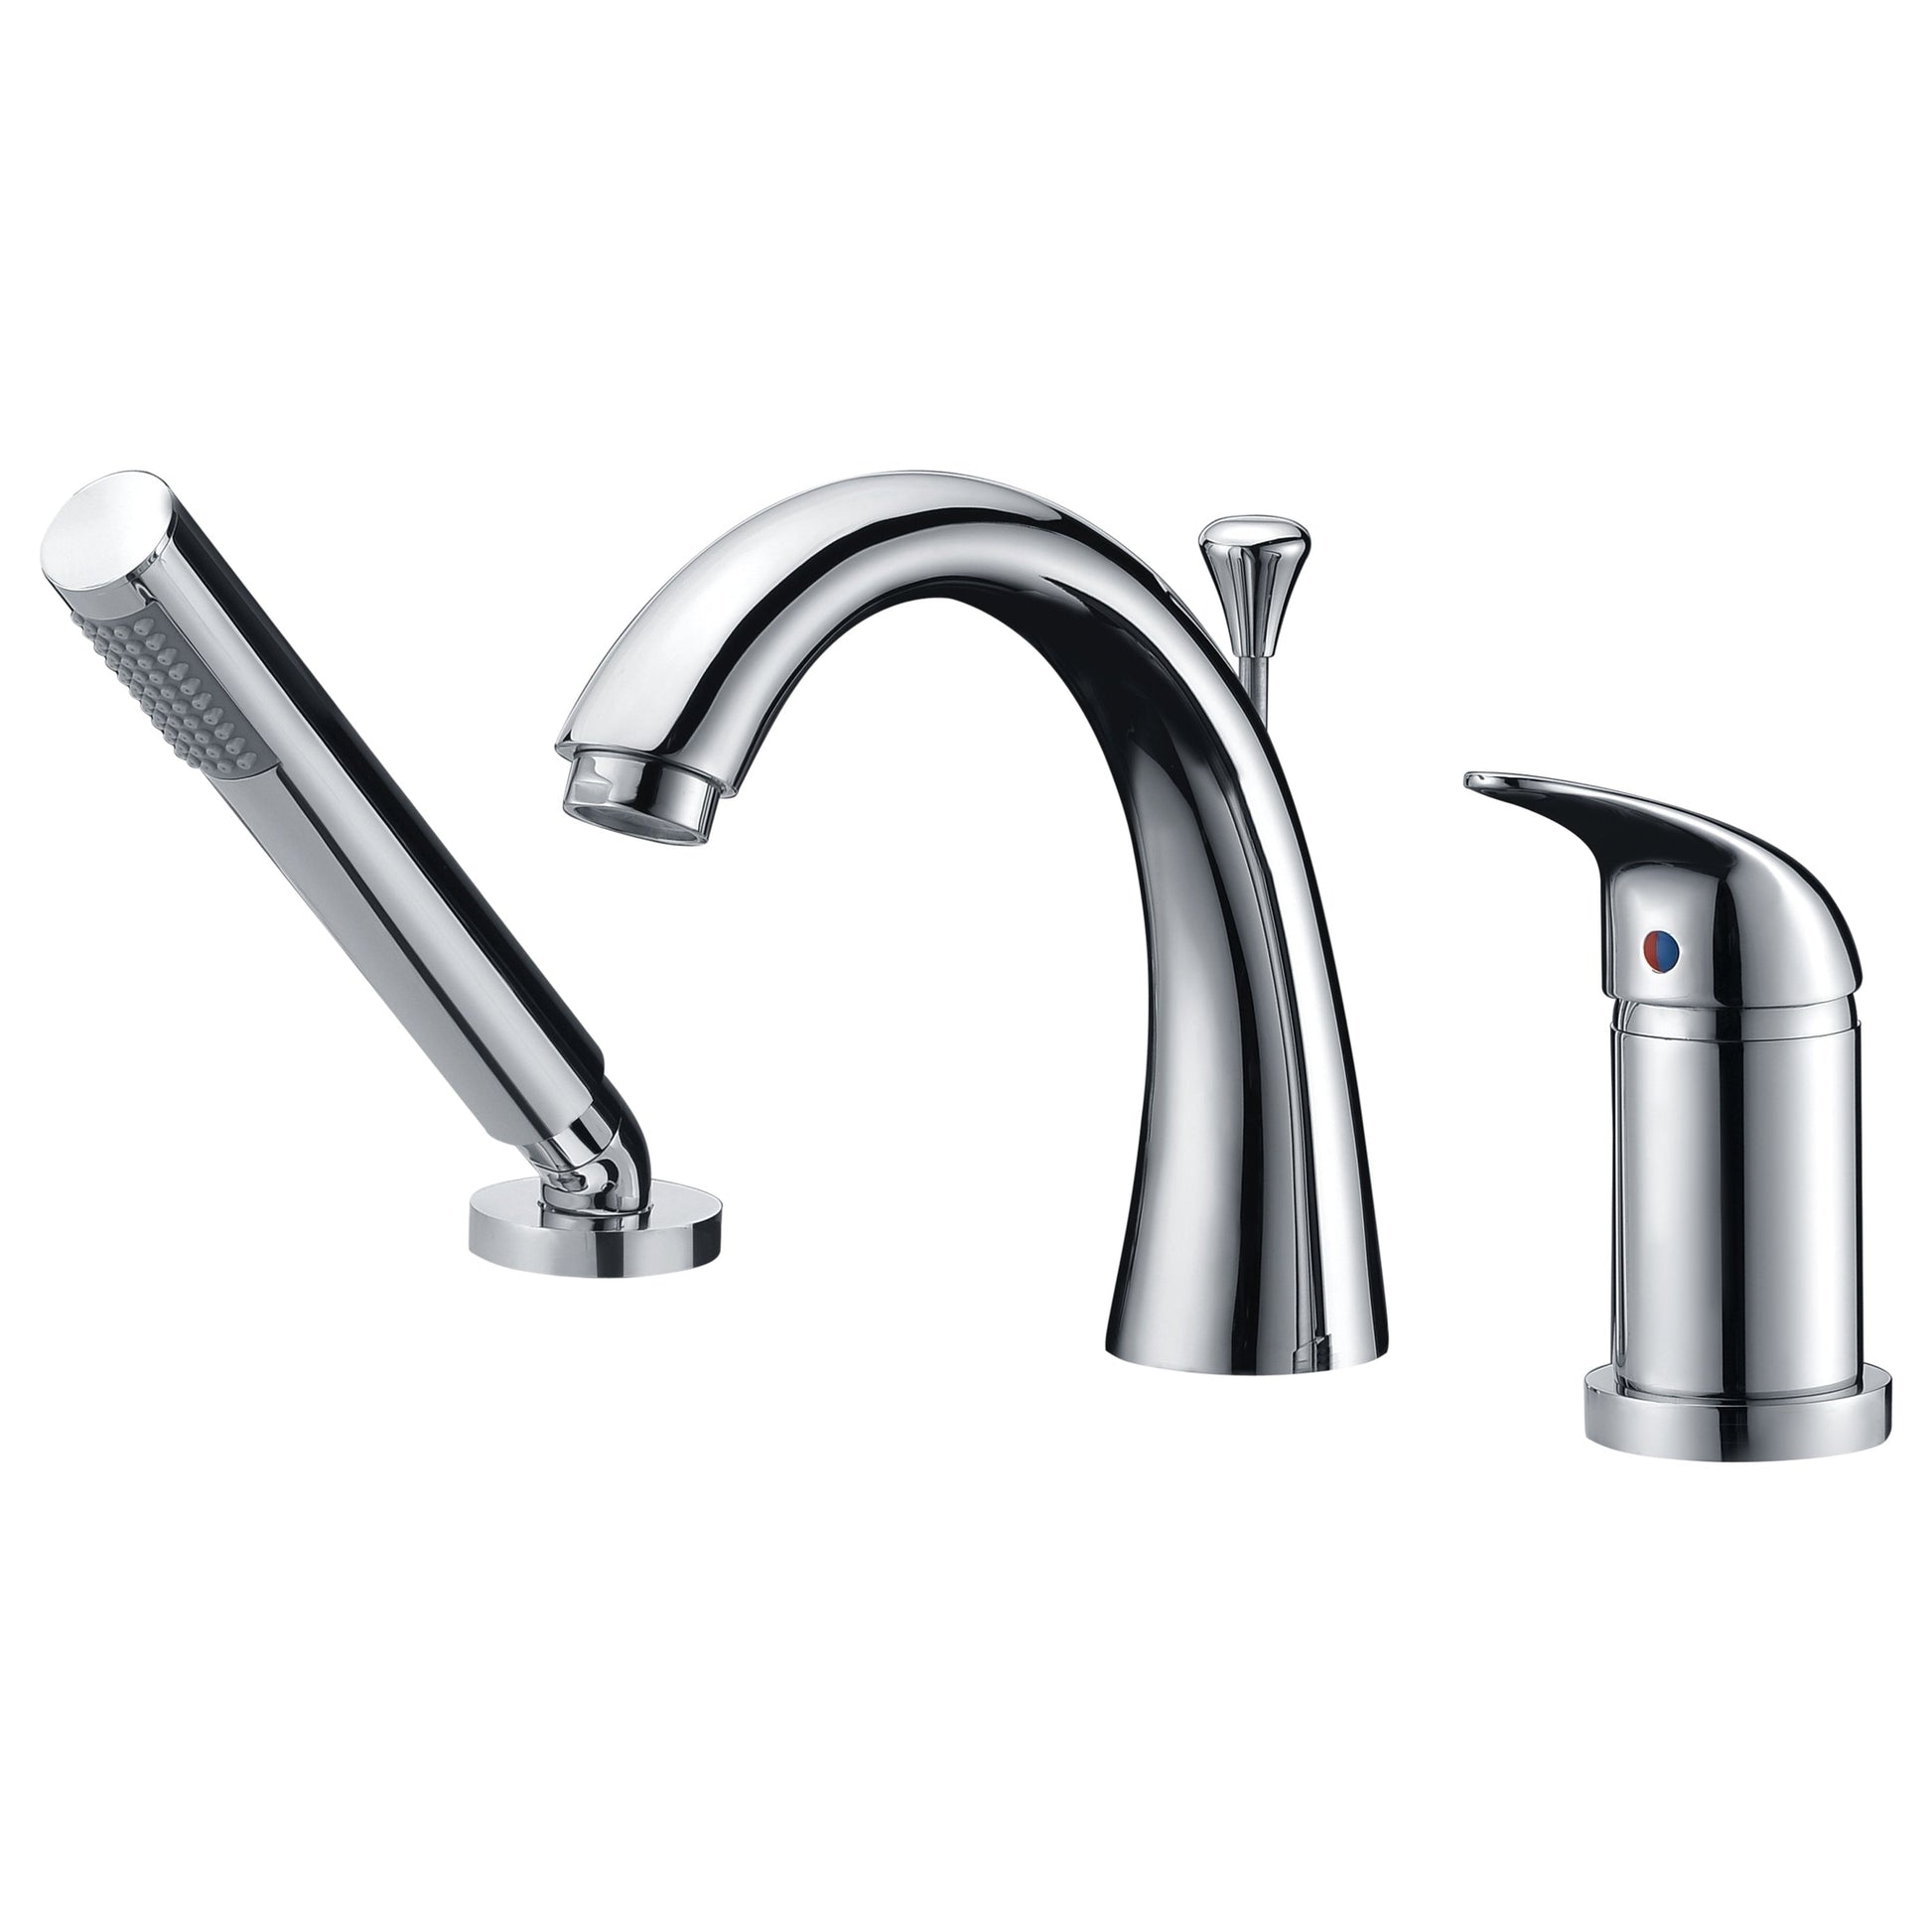 ANZZI Den Series Single Handle Polished Chrome Roman Tub Faucet With Euro-Grip Handheld Sprayer